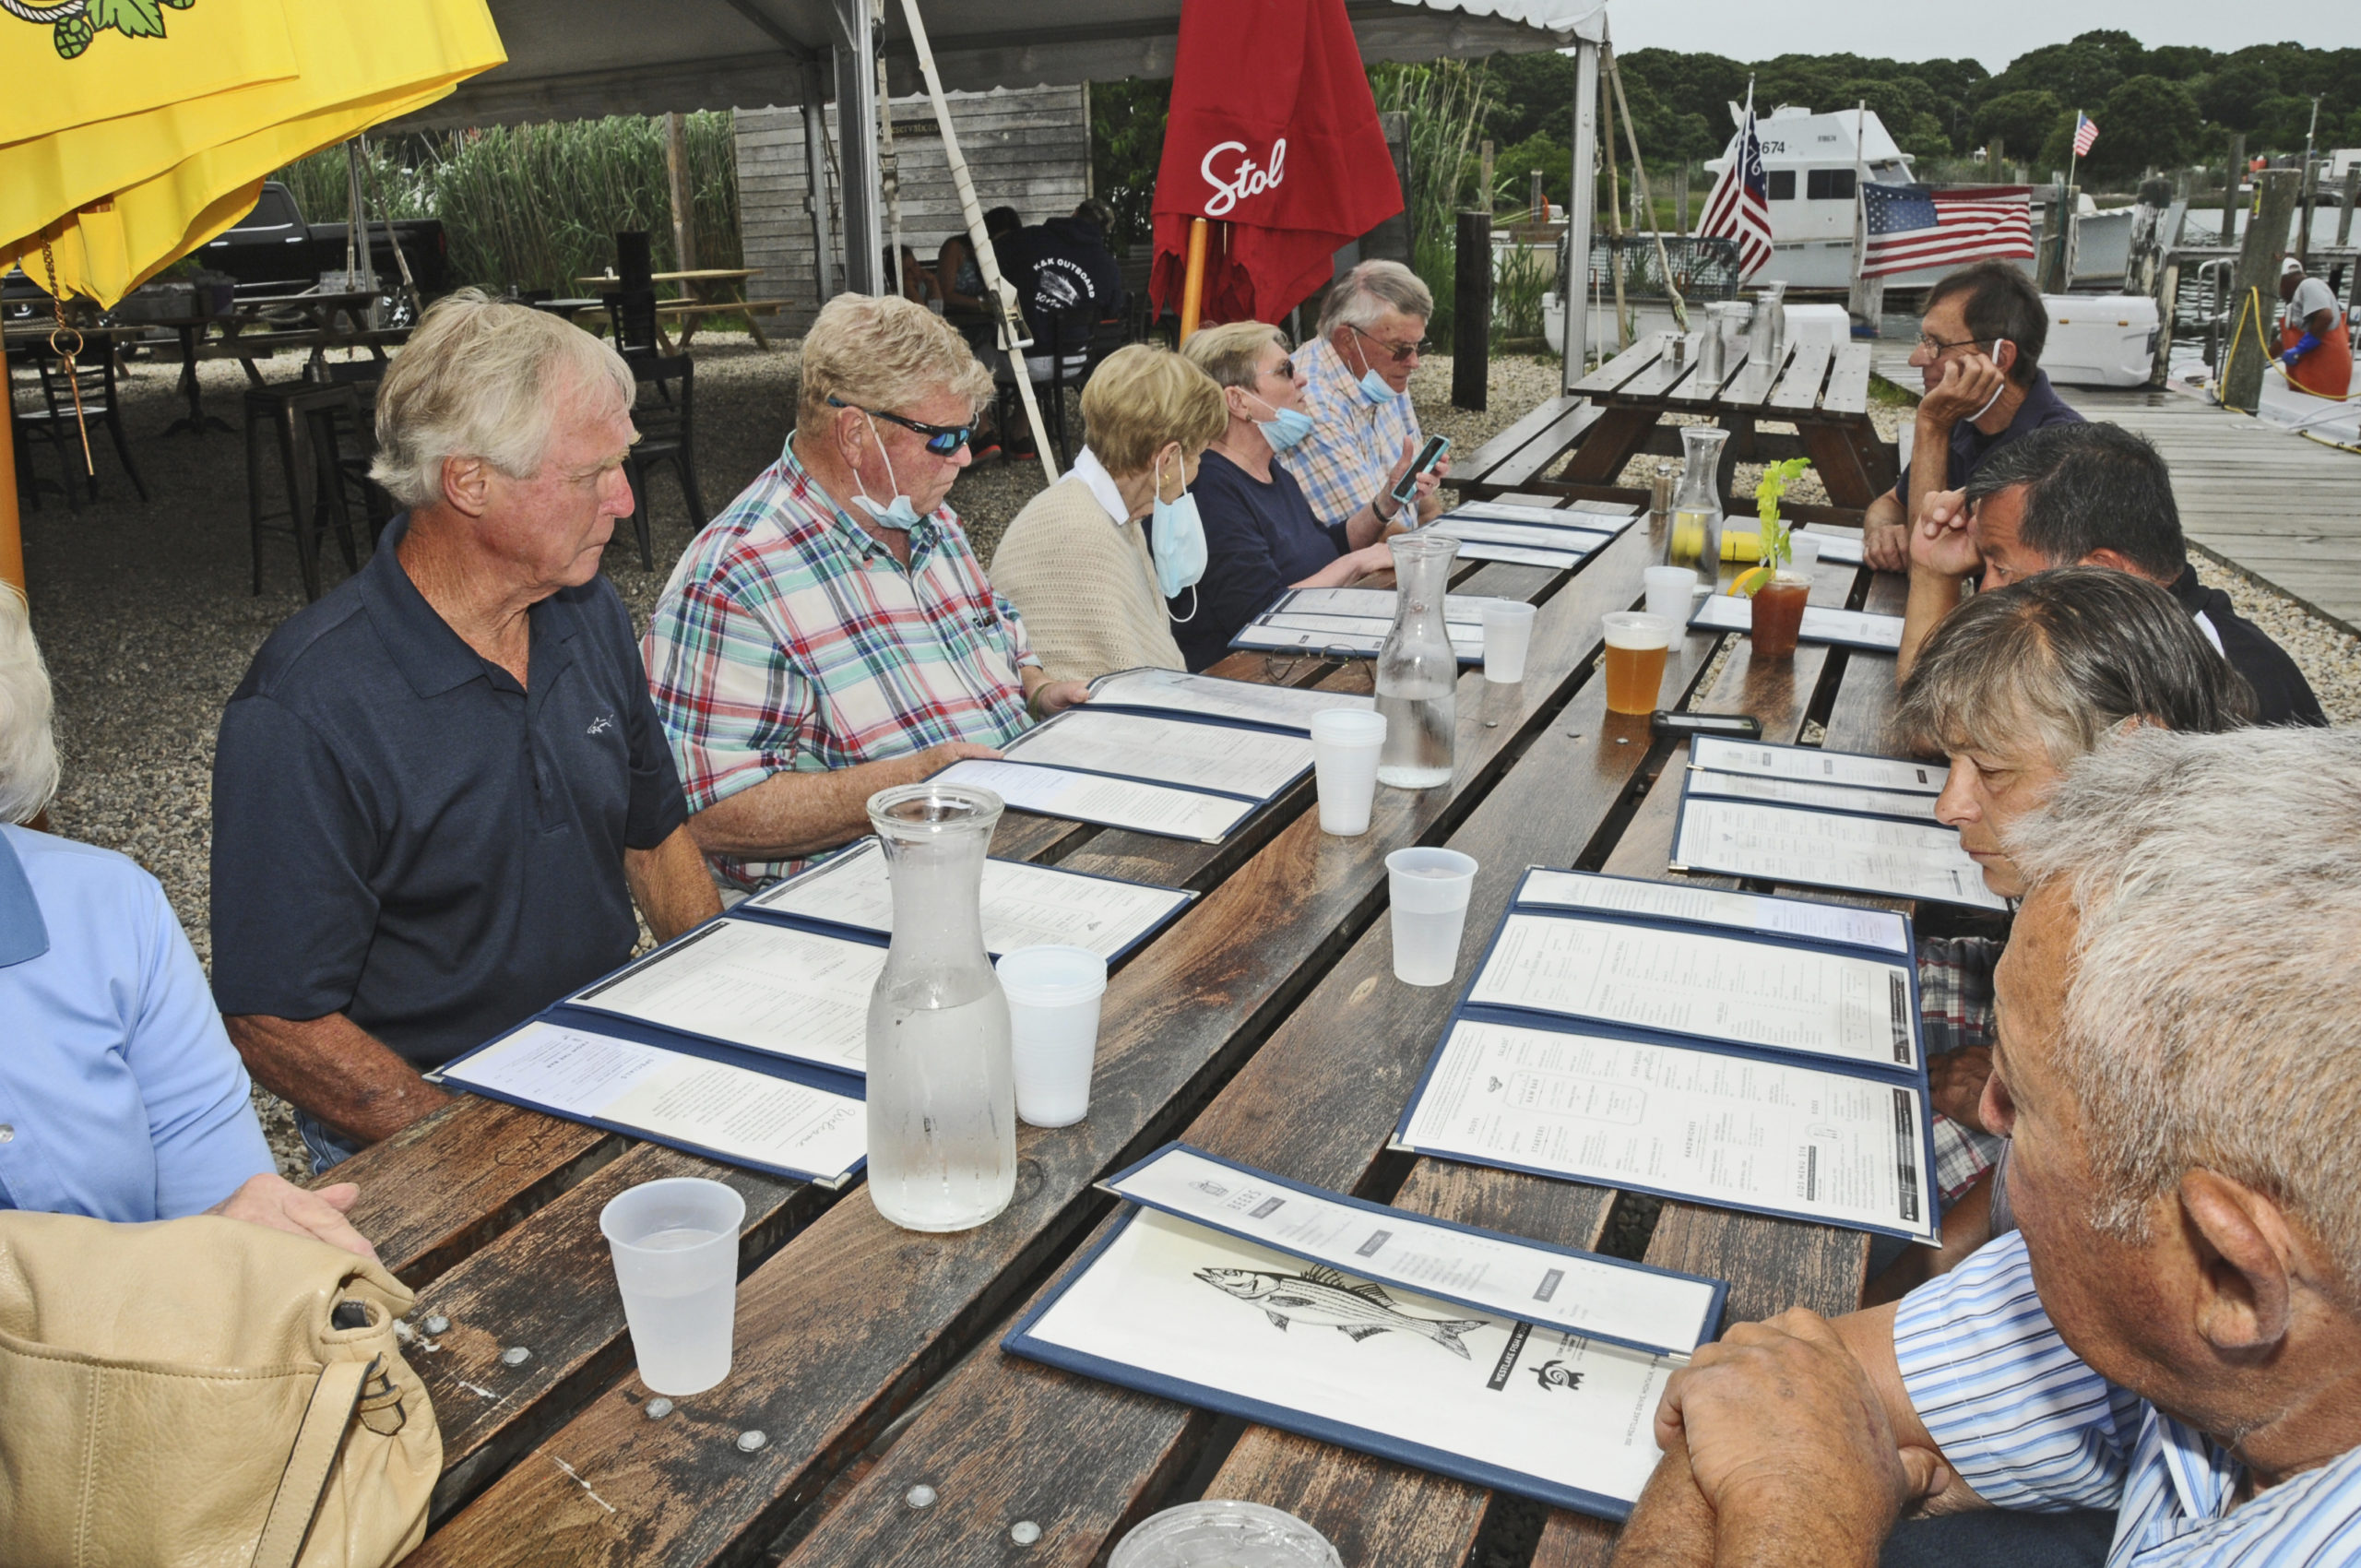 On Tuesday, July 7th, Montauk Fire Department's Fire Police Company No. 6 took a break from their duties for a Family Gathering at Westlake Fish House at the docks in Montauk.     RICHARD LEWIN